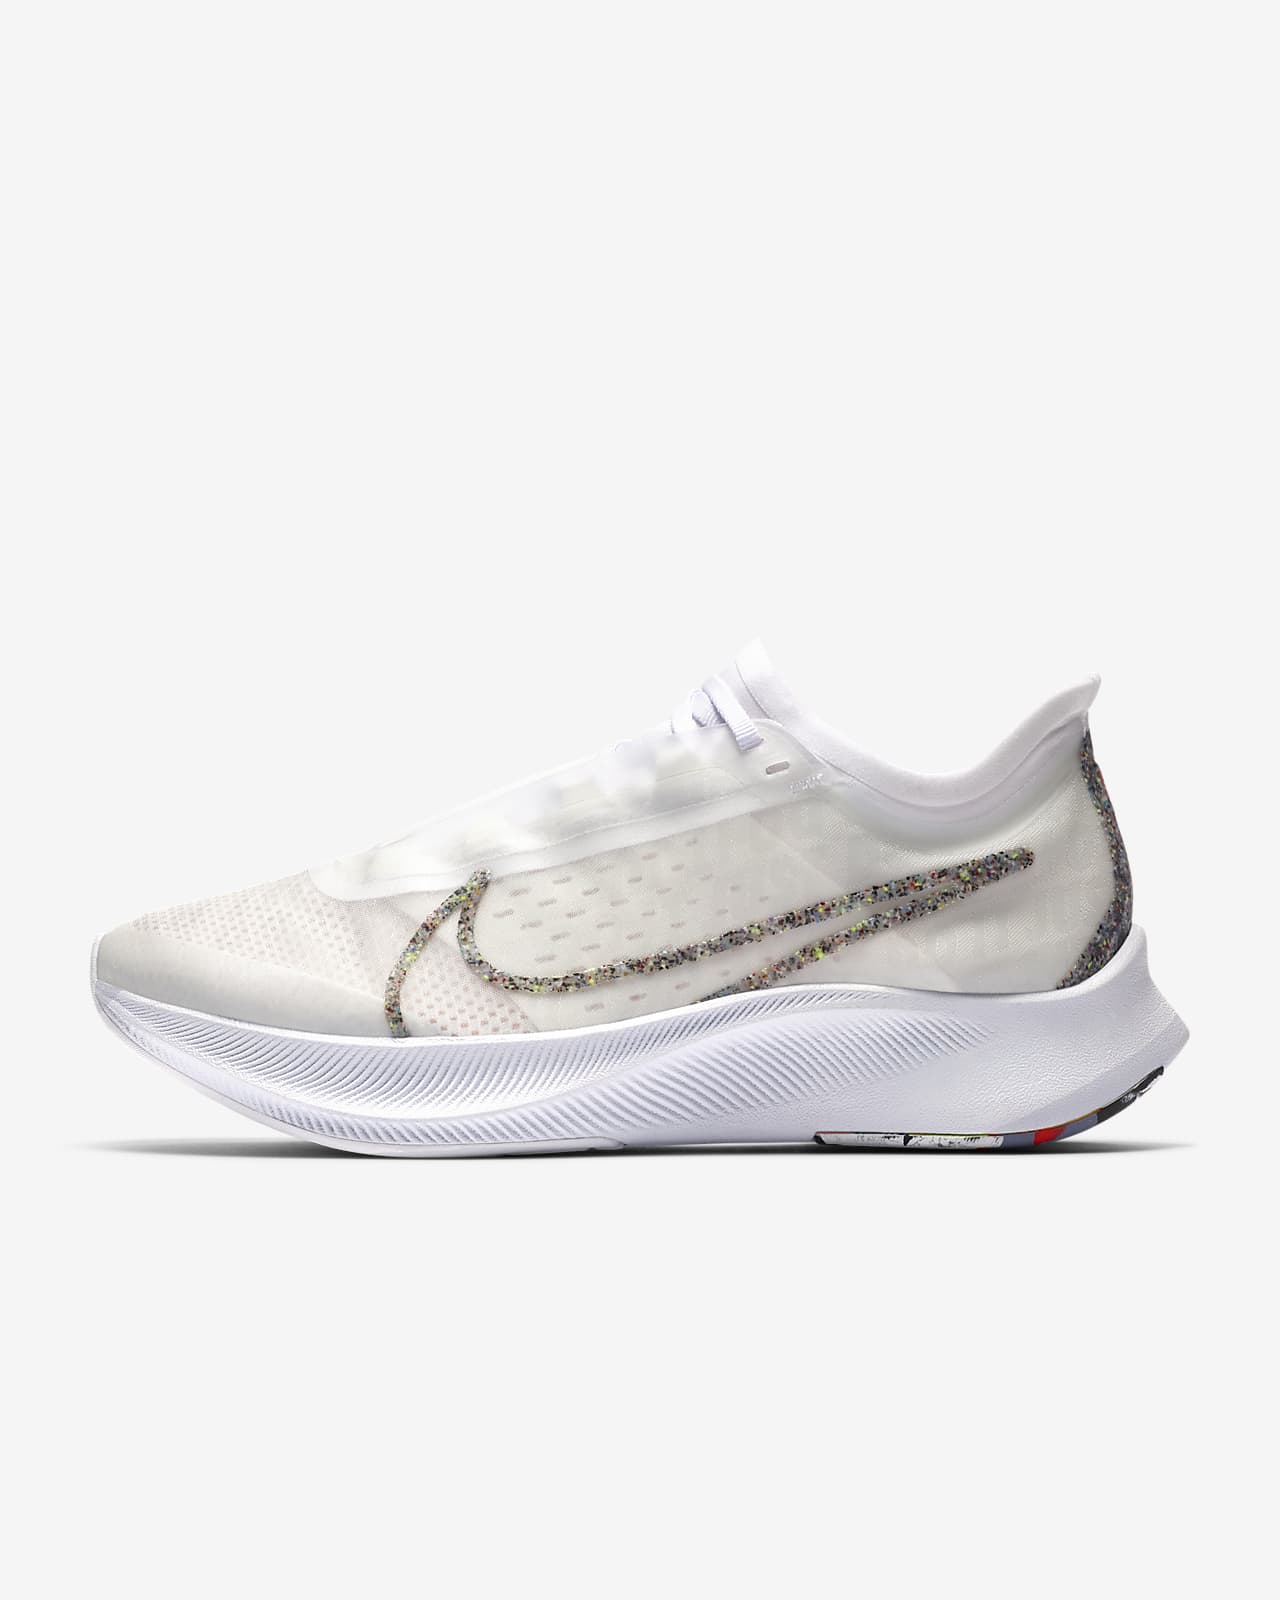 nike zoom fly 3 women's running shoes